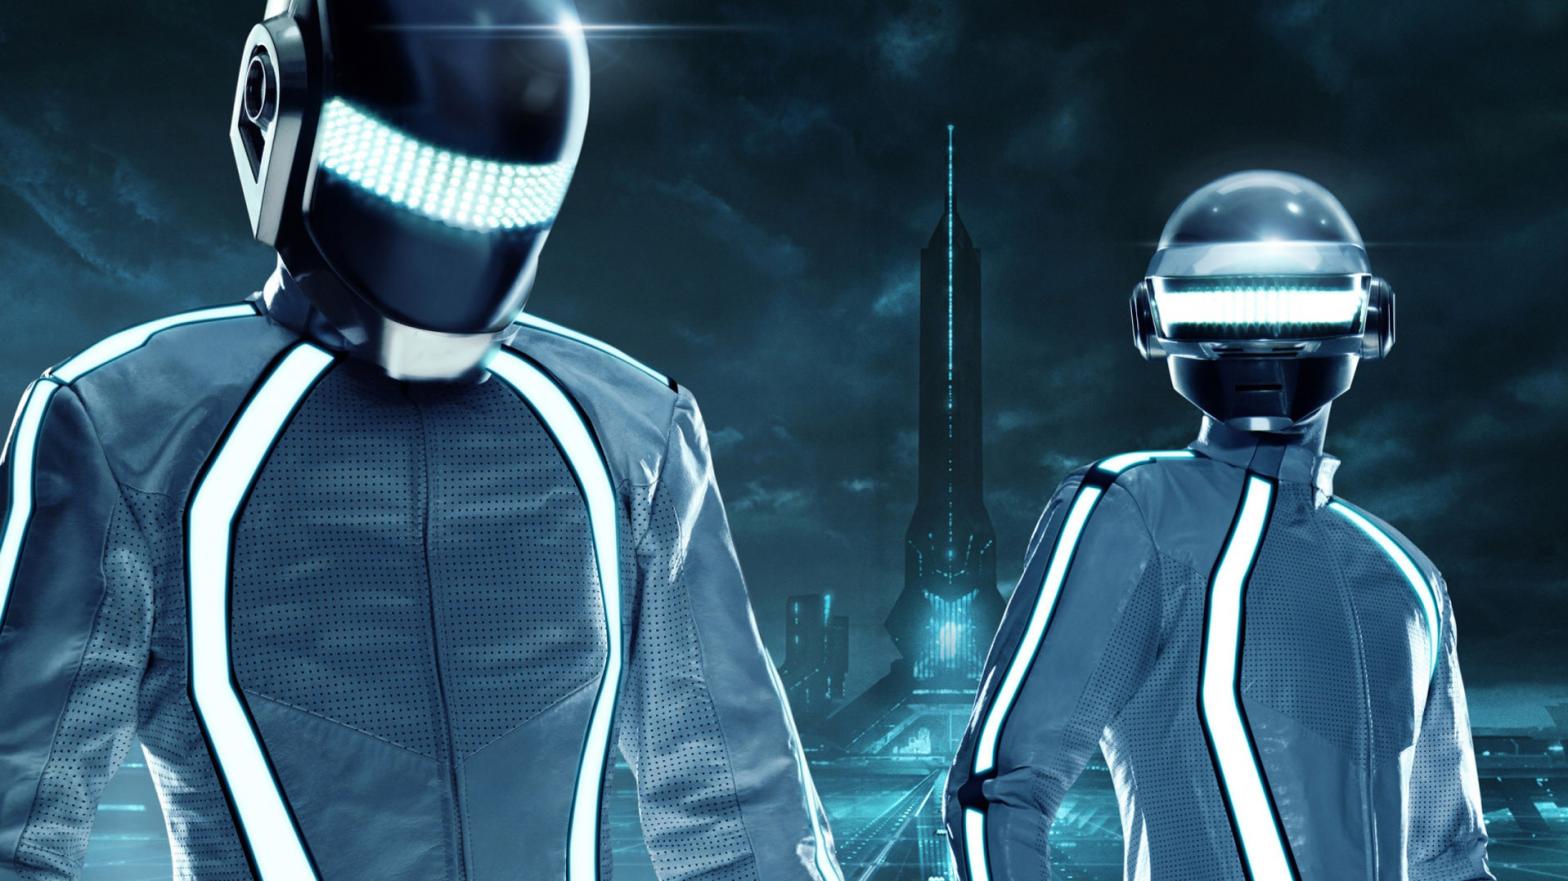 Daft Punk as seen in Tron: Legacy promotional imagery. (Image: Disney)